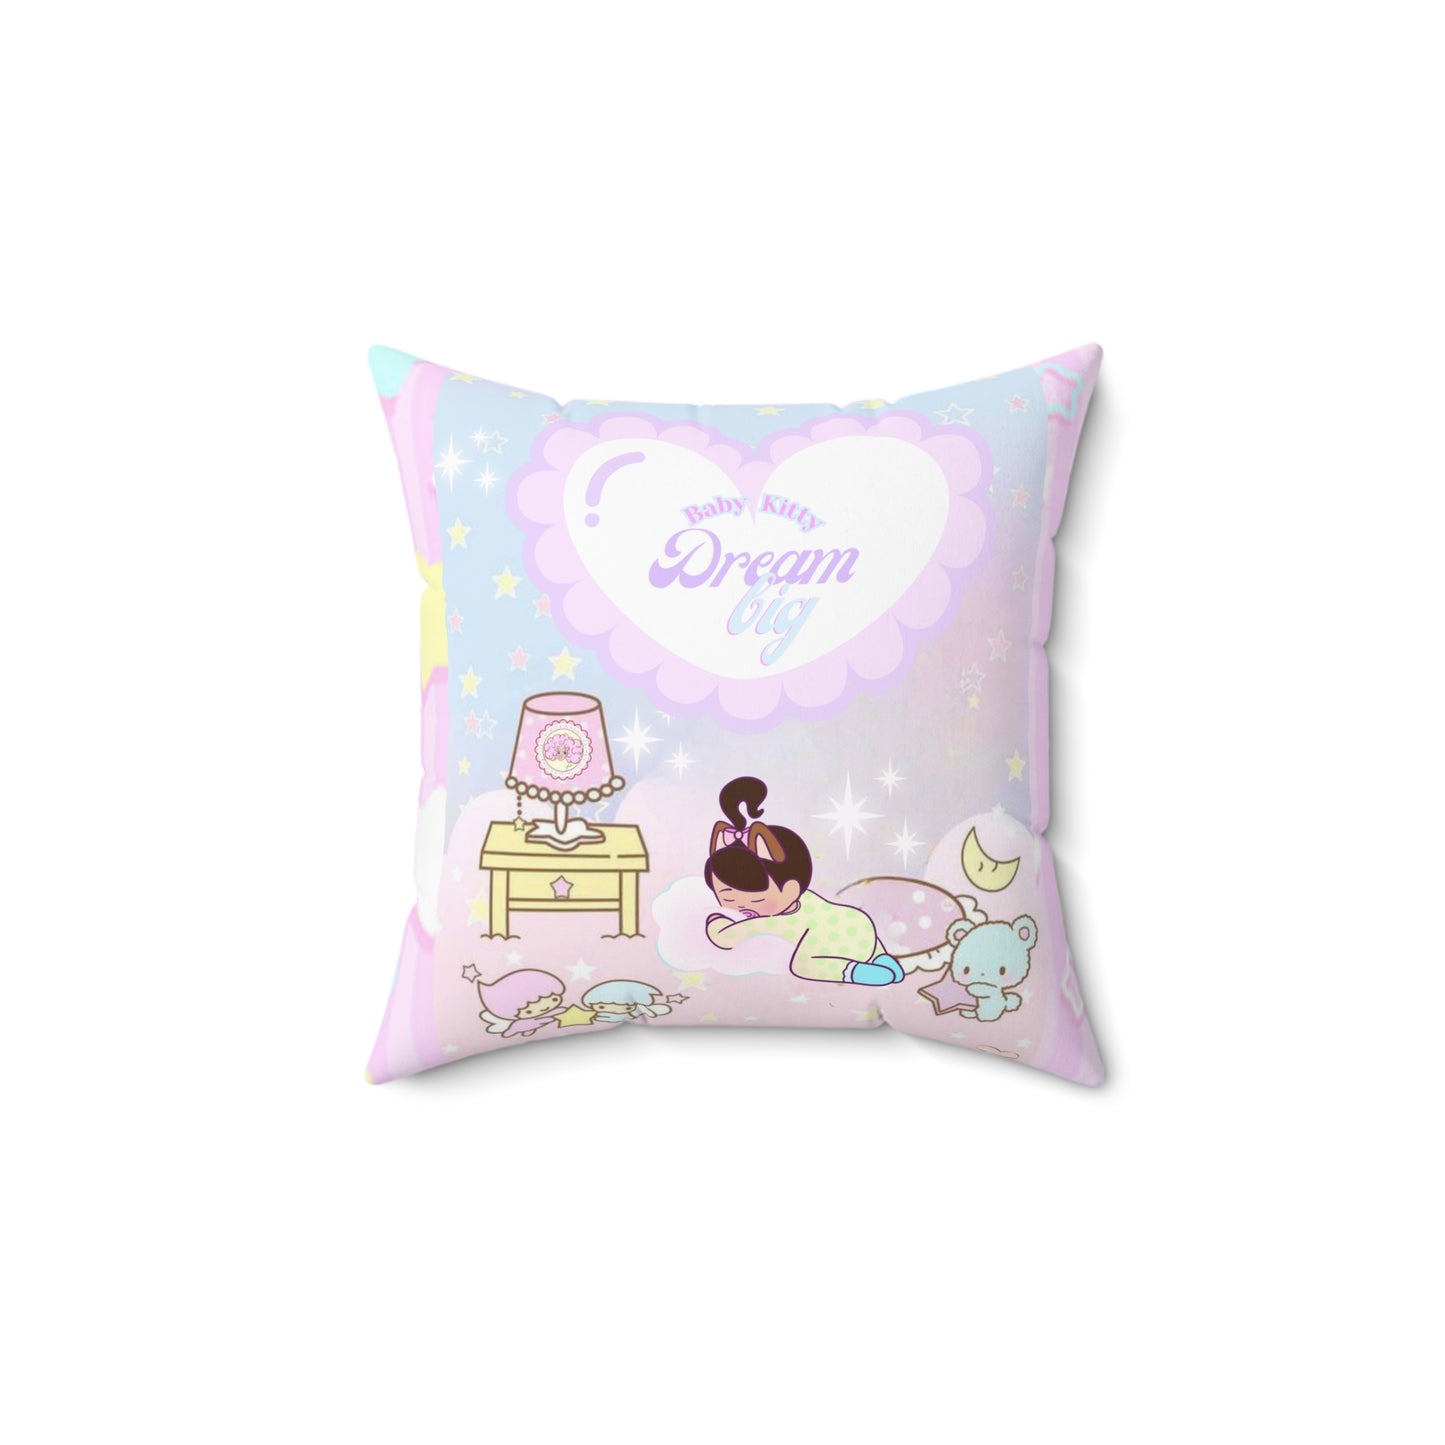 Sweet Dreams Polyester Square Pillow (baby lupita kitty )